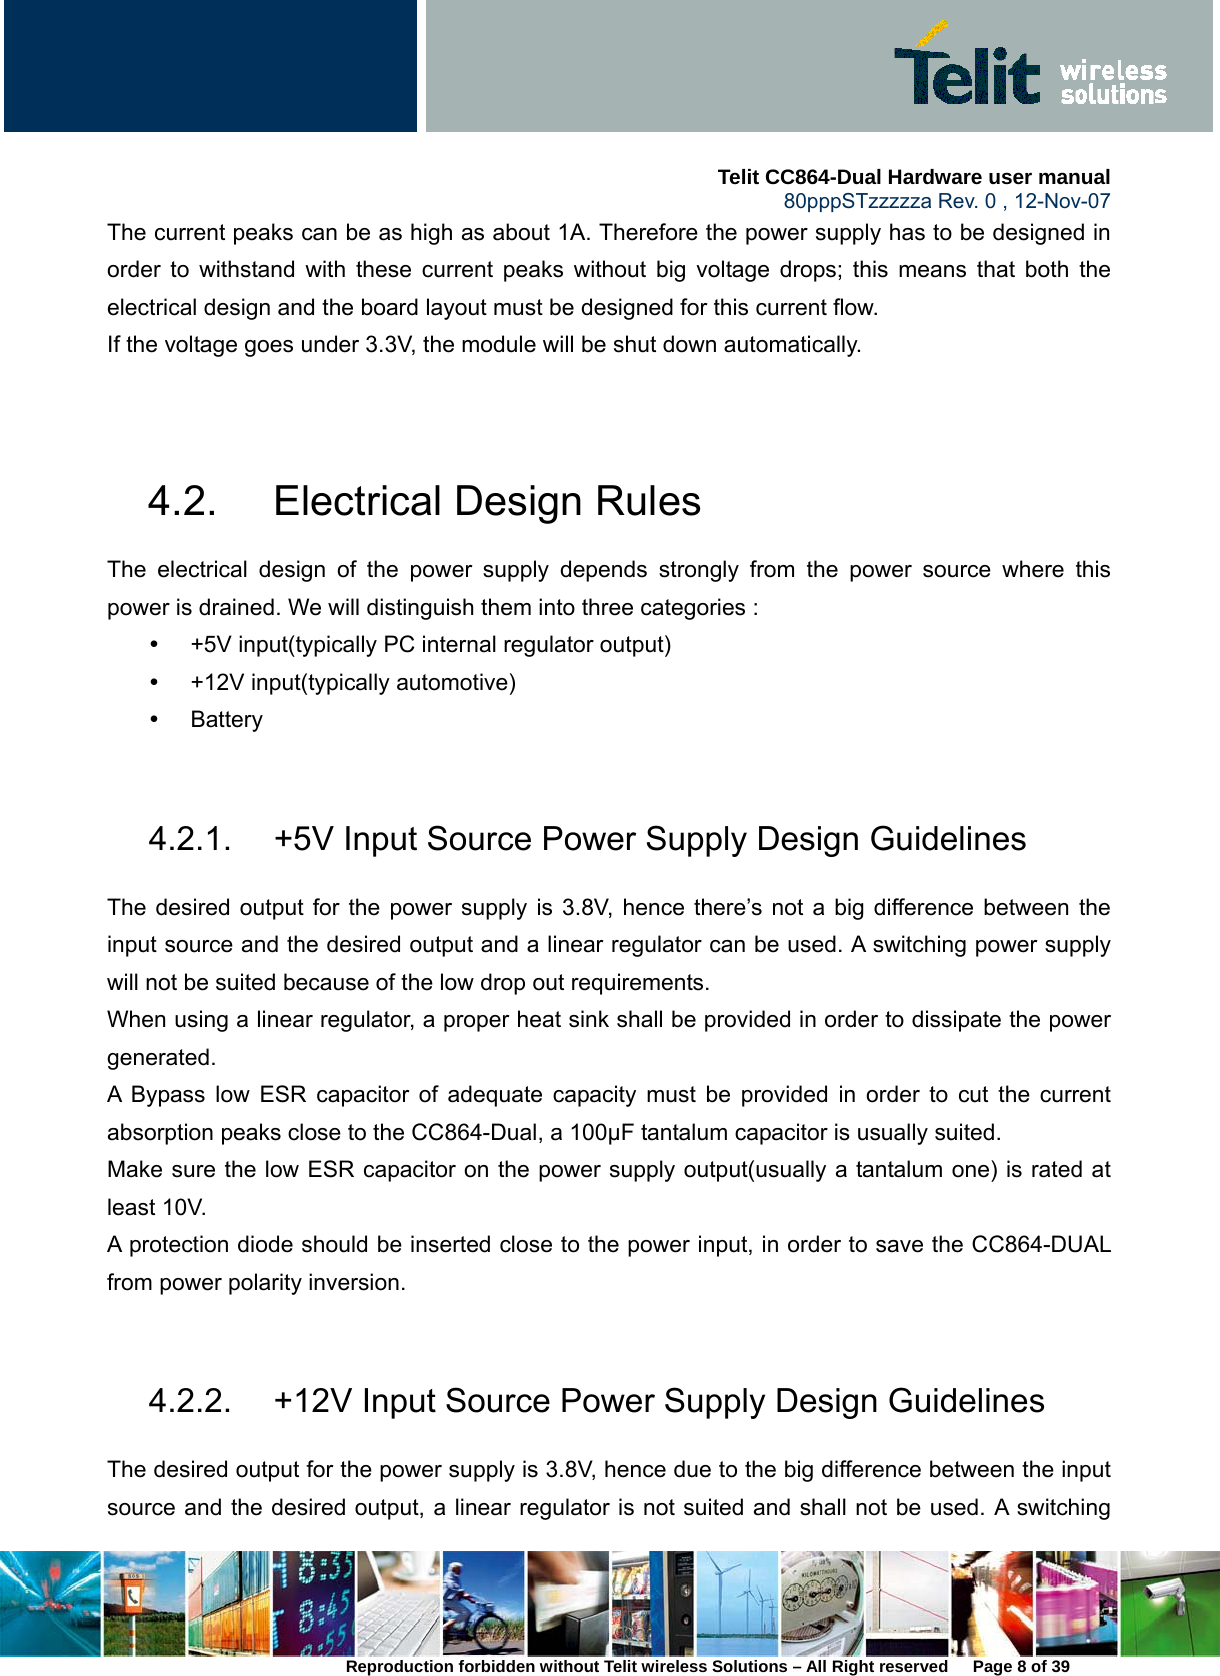     Telit CC864-Dual Hardware user manual   80pppSTzzzzza Rev. 0 , 12-Nov-07 Reproduction forbidden without Telit wireless Solutions – All Right reserved      Page 8 of 39 The current peaks can be as high as about 1A. Therefore the power supply has to be designed in order to withstand with these current peaks without big voltage drops; this means that both the electrical design and the board layout must be designed for this current flow.   If the voltage goes under 3.3V, the module will be shut down automatically.     4.2.  Electrical Design Rules   The electrical design of the power supply depends strongly from the power source where this power is drained. We will distinguish them into three categories :   y  +5V input(typically PC internal regulator output) y  +12V input(typically automotive) y Battery   4.2.1.  +5V Input Source Power Supply Design Guidelines The desired output for the power supply is 3.8V, hence there’s not a big difference between the input source and the desired output and a linear regulator can be used. A switching power supply will not be suited because of the low drop out requirements.   When using a linear regulator, a proper heat sink shall be provided in order to dissipate the power generated. A Bypass low ESR capacitor of adequate capacity must be provided in order to cut the current absorption peaks close to the CC864-Dual, a 100µF tantalum capacitor is usually suited. Make sure the low ESR capacitor on the power supply output(usually a tantalum one) is rated at least 10V. A protection diode should be inserted close to the power input, in order to save the CC864-DUAL from power polarity inversion.    4.2.2.  +12V Input Source Power Supply Design Guidelines The desired output for the power supply is 3.8V, hence due to the big difference between the input source and the desired output, a linear regulator is not suited and shall not be used. A switching 